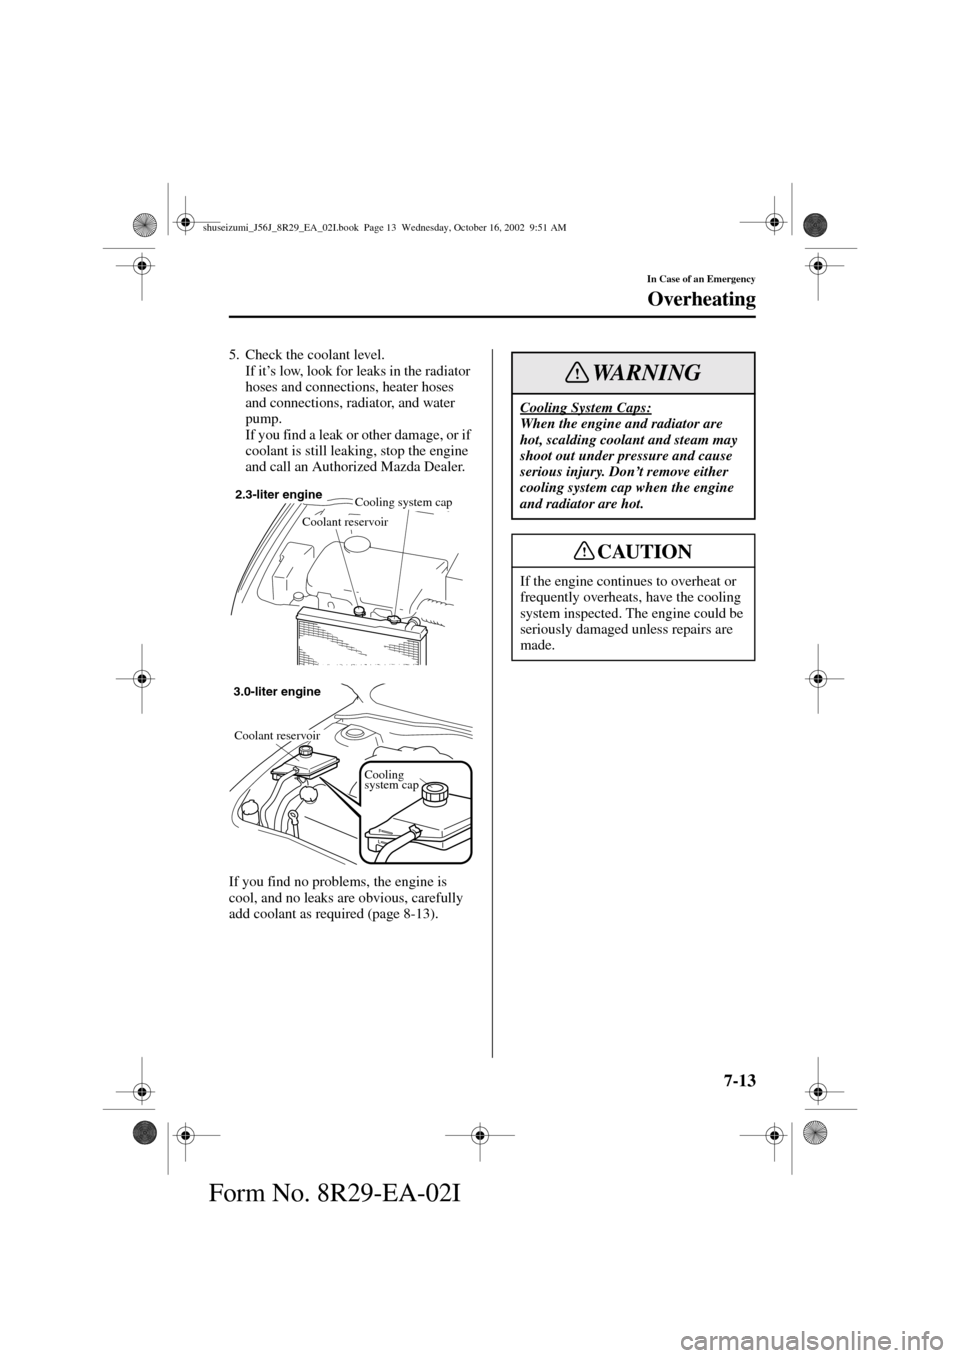 MAZDA MODEL 6 2003  Owners Manual (in English) 7-13
In Case of an Emergency
Overheating
Form No. 8R29-EA-02I
5. Check the coolant level.
If it’s low, look for leaks in the radiator 
hoses and connections, heater hoses 
and connections, radiator,